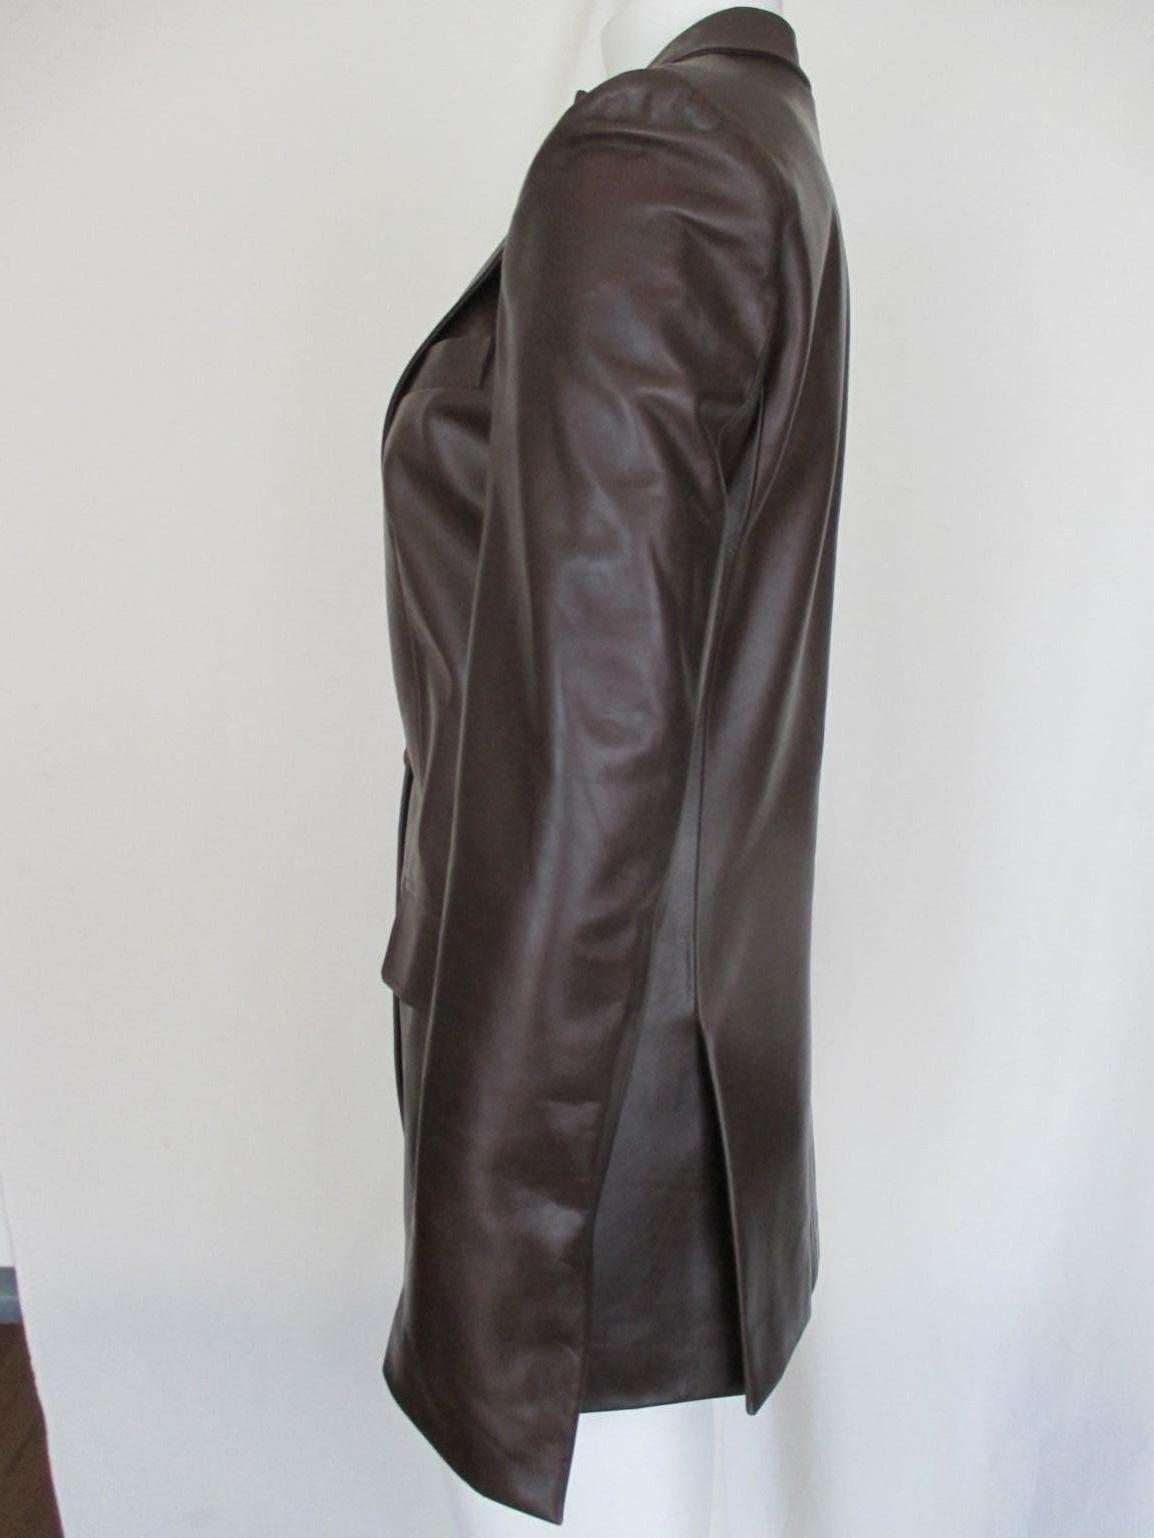 Black Gucci Brown Leather Jacket